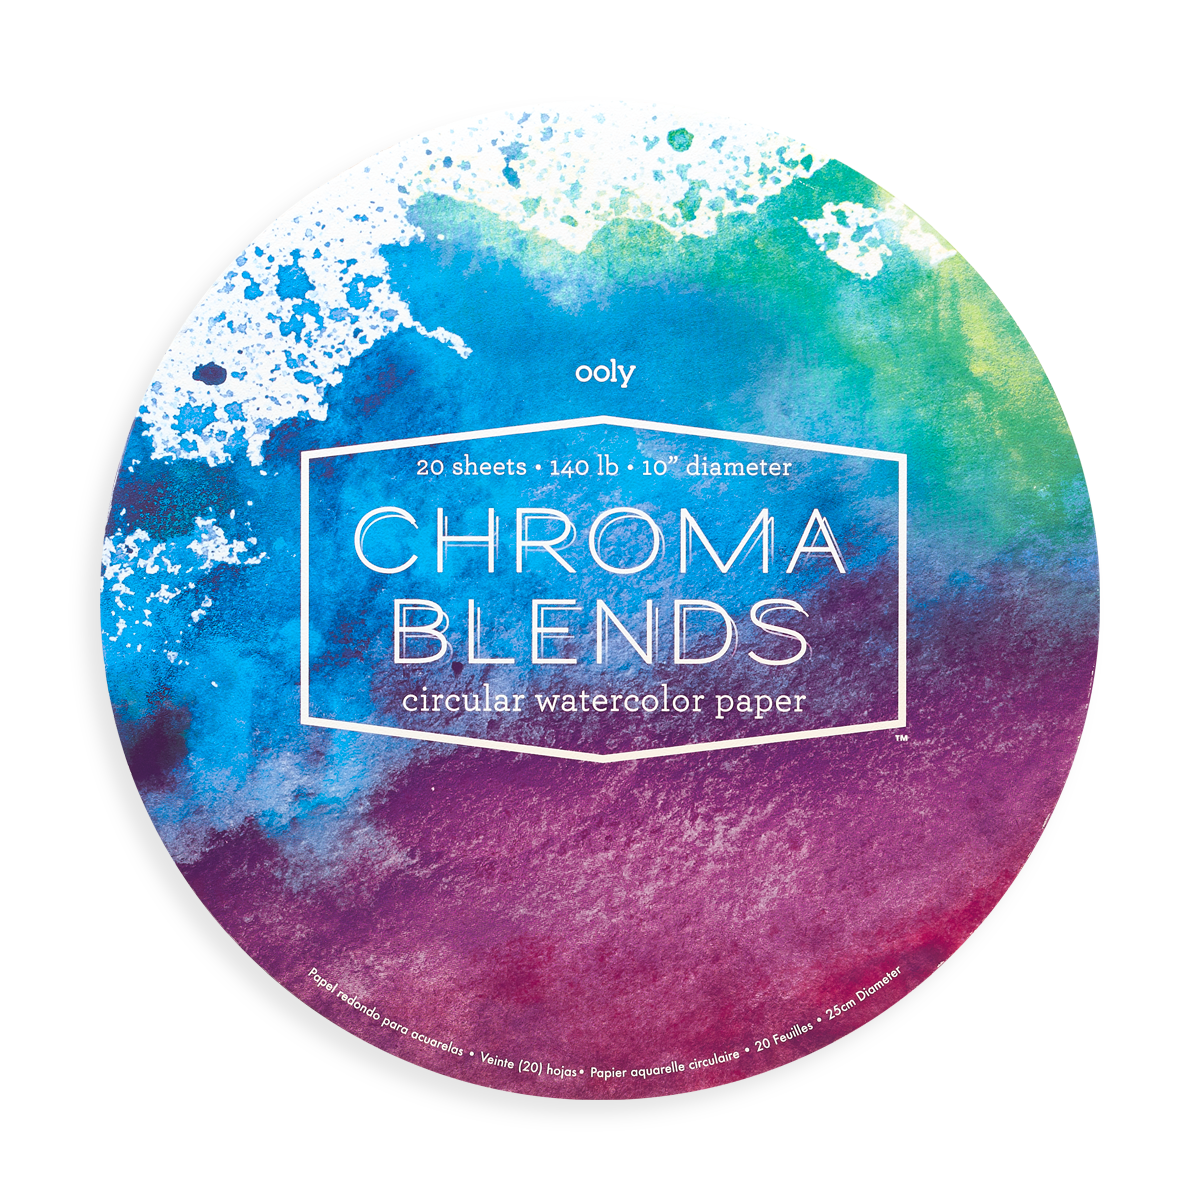 OOLY Chroma Blends Circular Watercolor Paper (front)